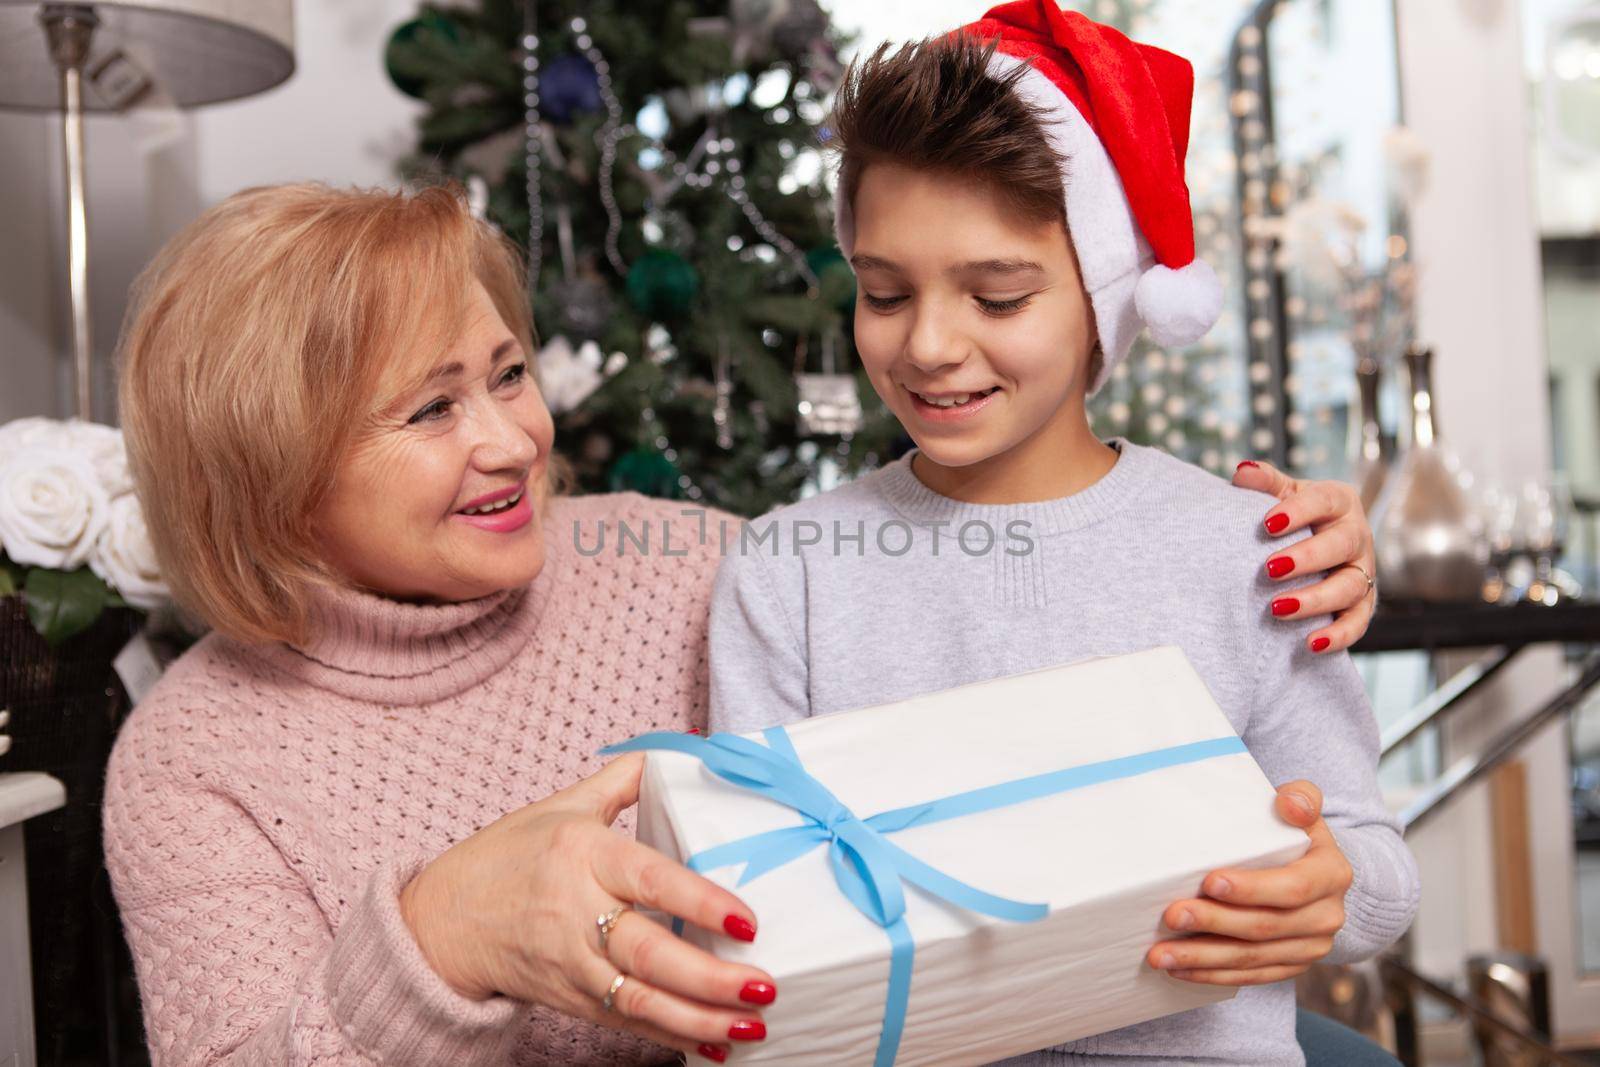 Elderly woman smiling joyfully, giving Christmas present to her young grandson. Cute little boy in Santa Claus hat receiving x-mas gift from grandma